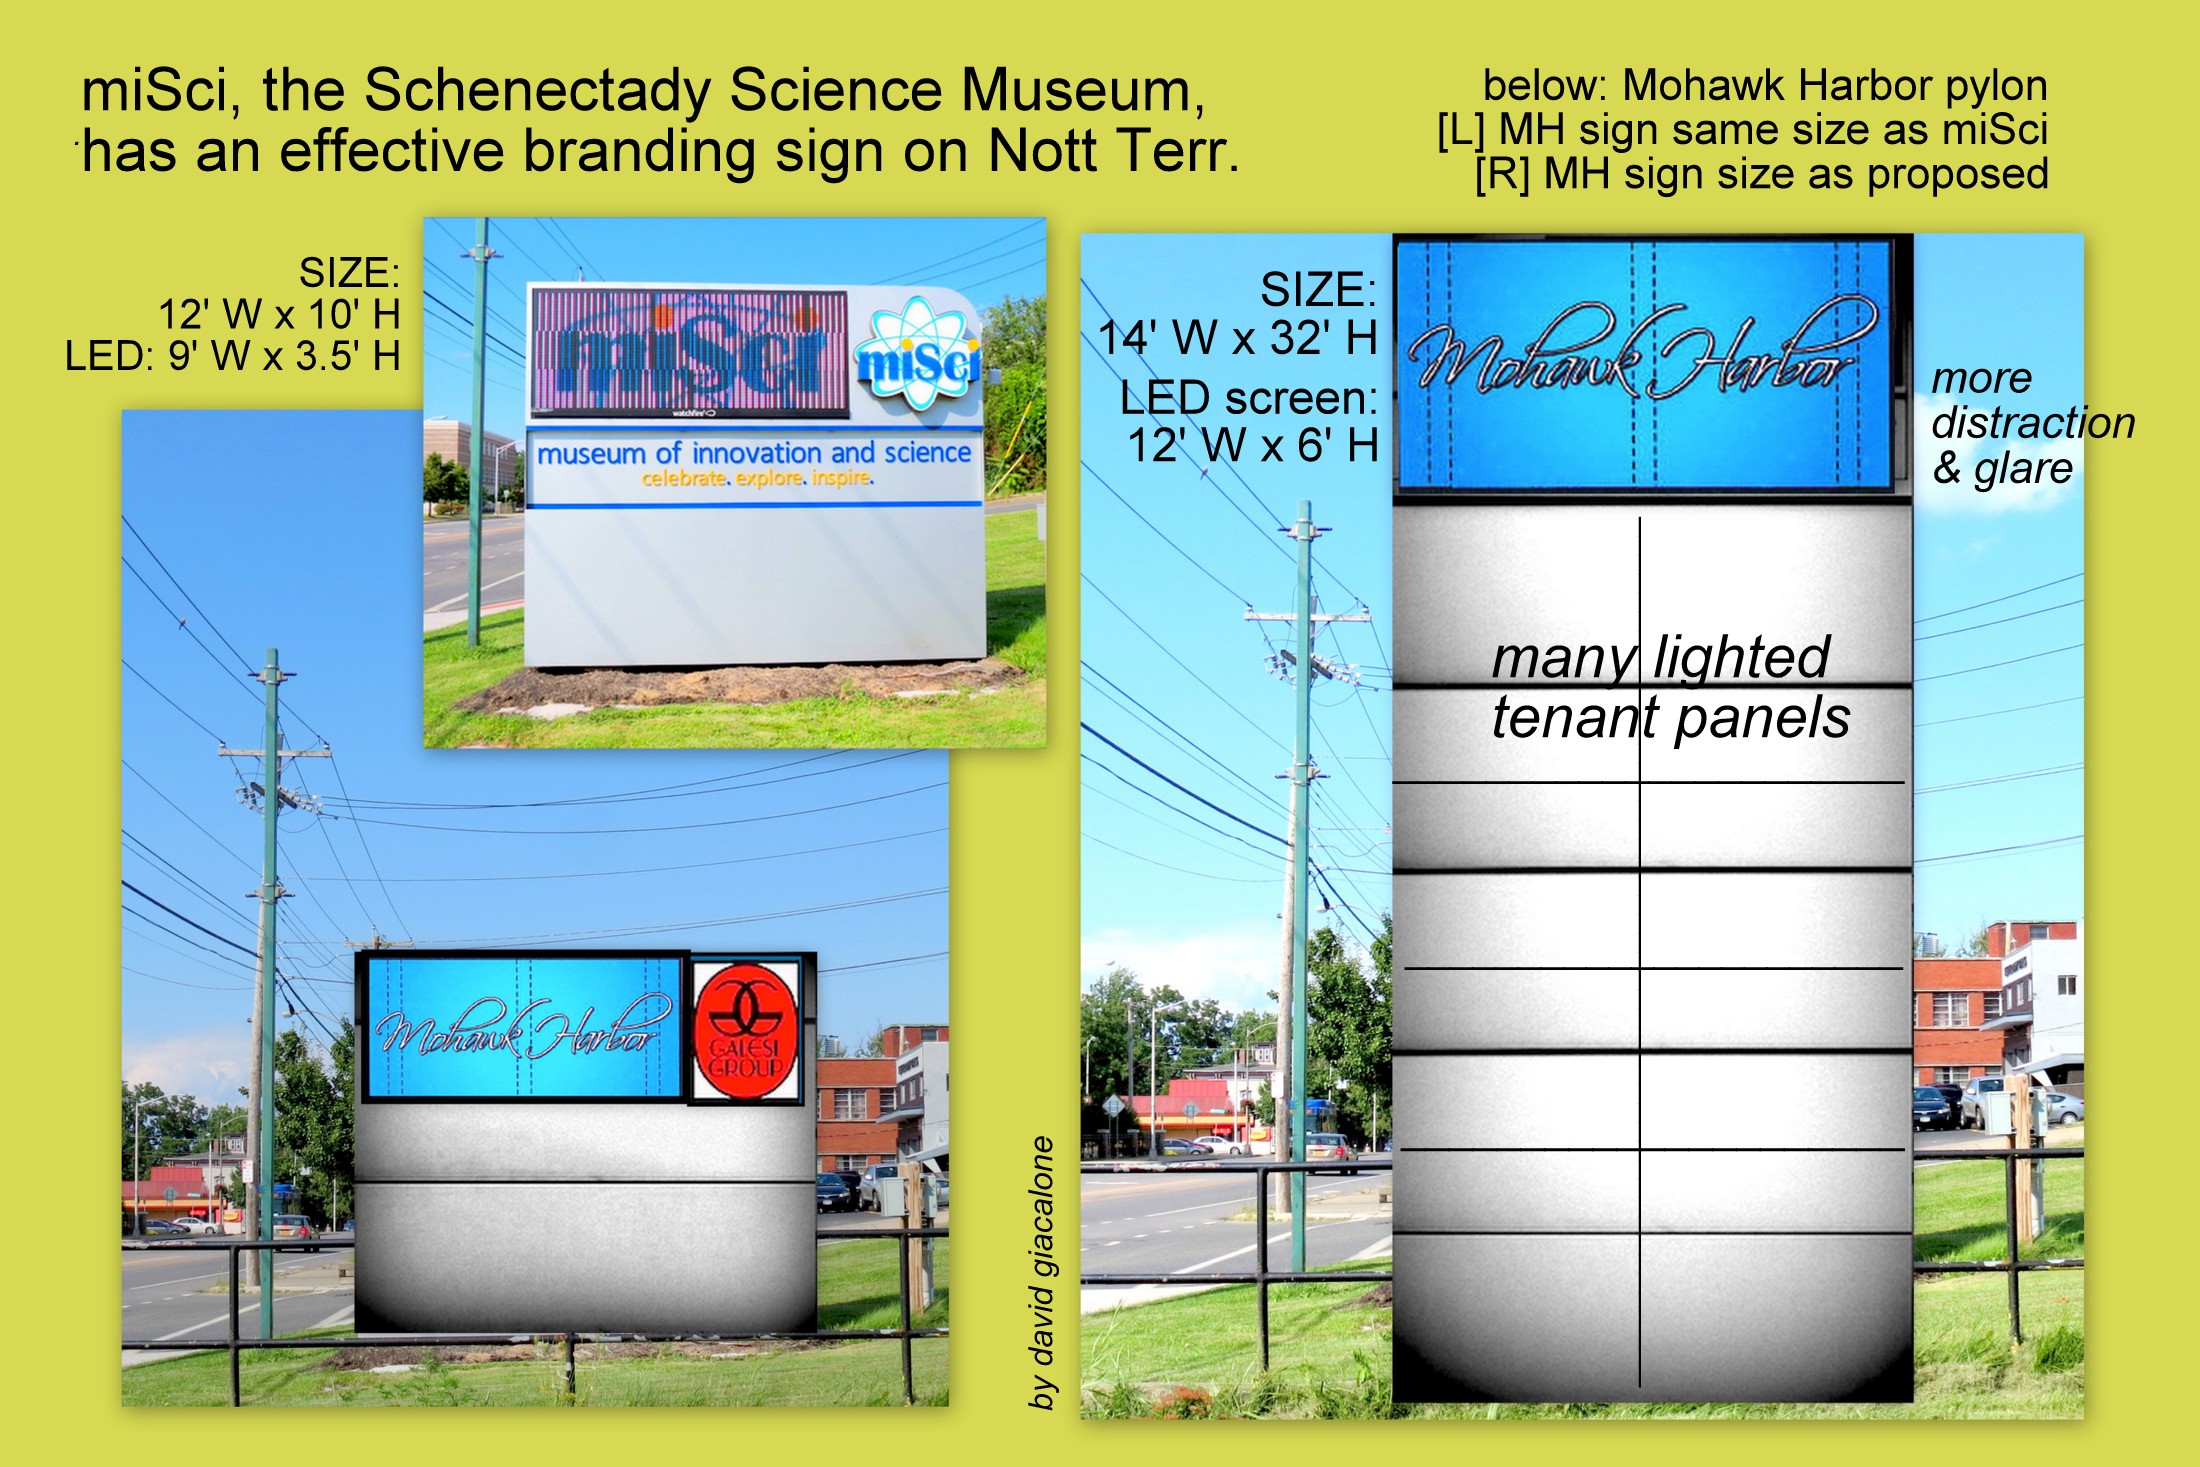 miSci-MH-signs2